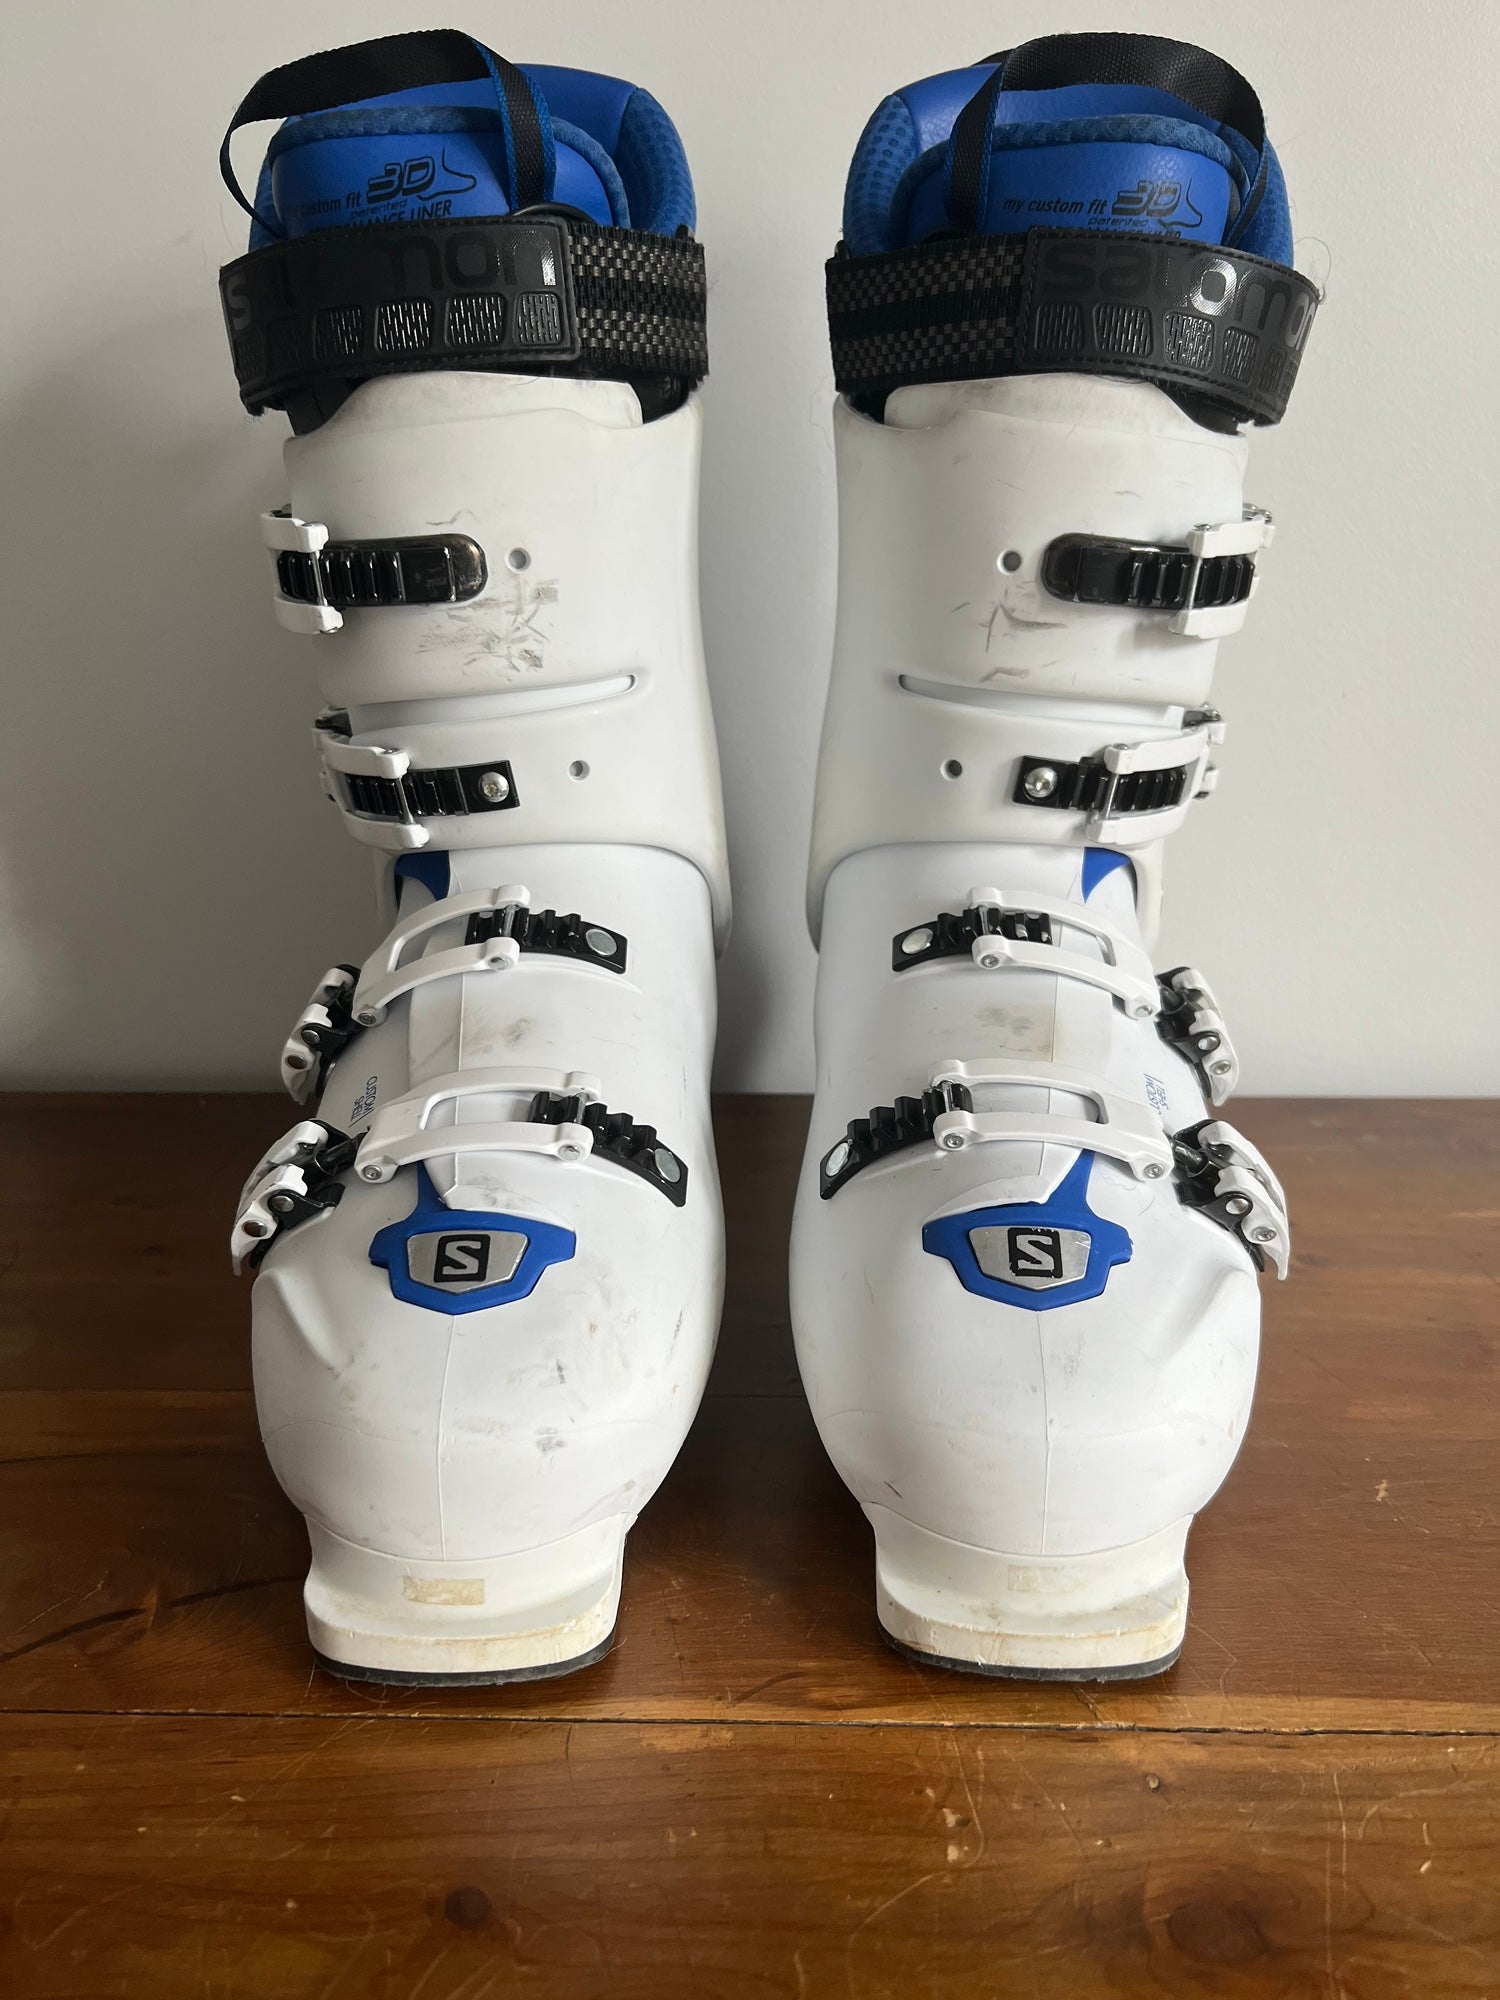 Telemacos Incubus voorspelling 2019 Salomon X Pro 100 Ski Boots Men's Size 30.5. | SidelineSwap